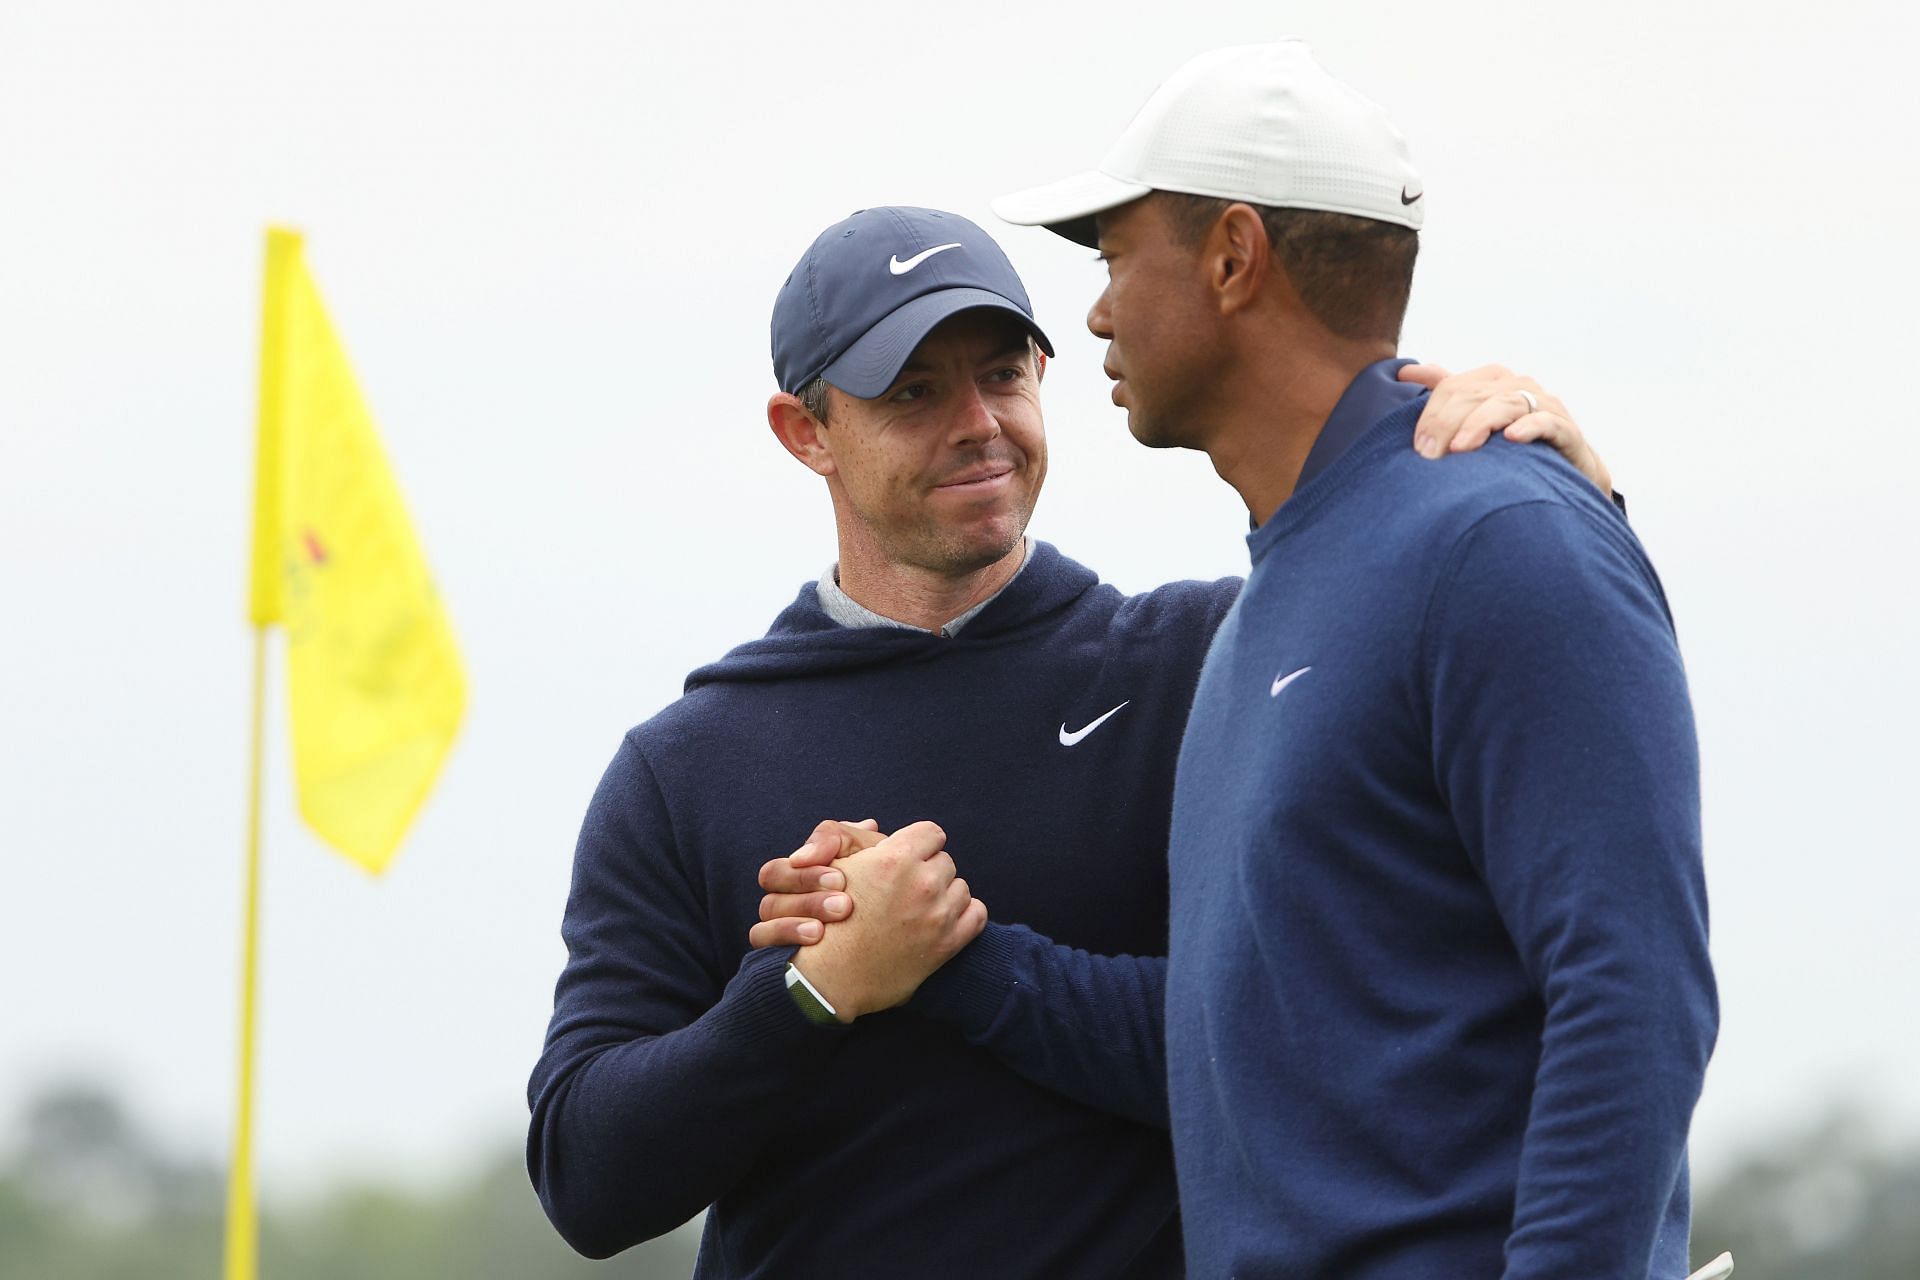 Tiger Woods is joining Rory McIlroy